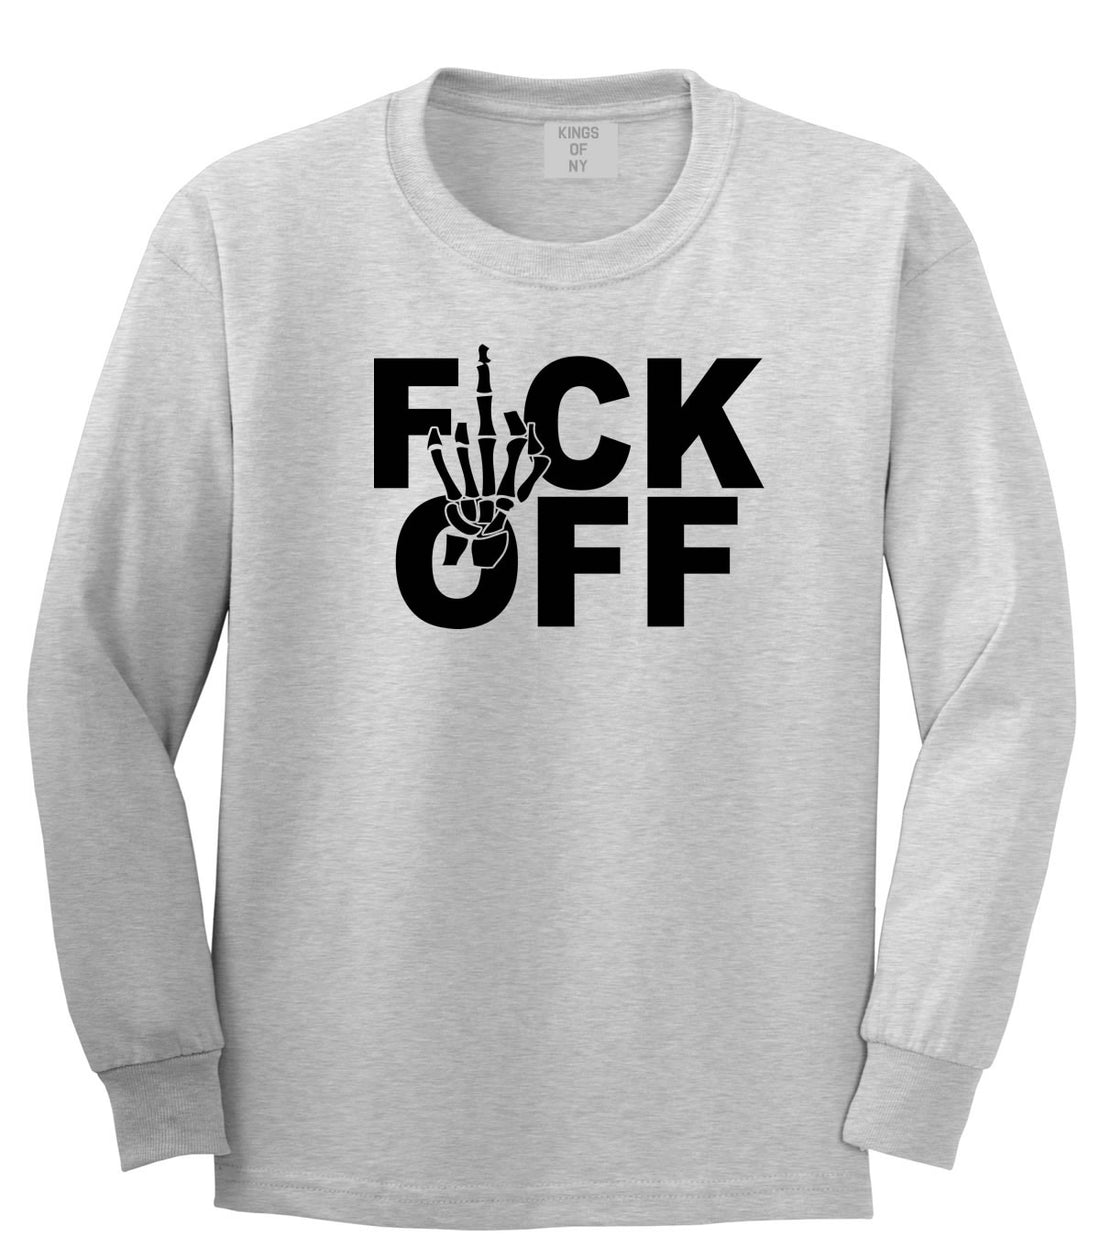 FCK OFF Skeleton Hand Boys Kids Long Sleeve T-Shirt in Grey by Kings Of NY